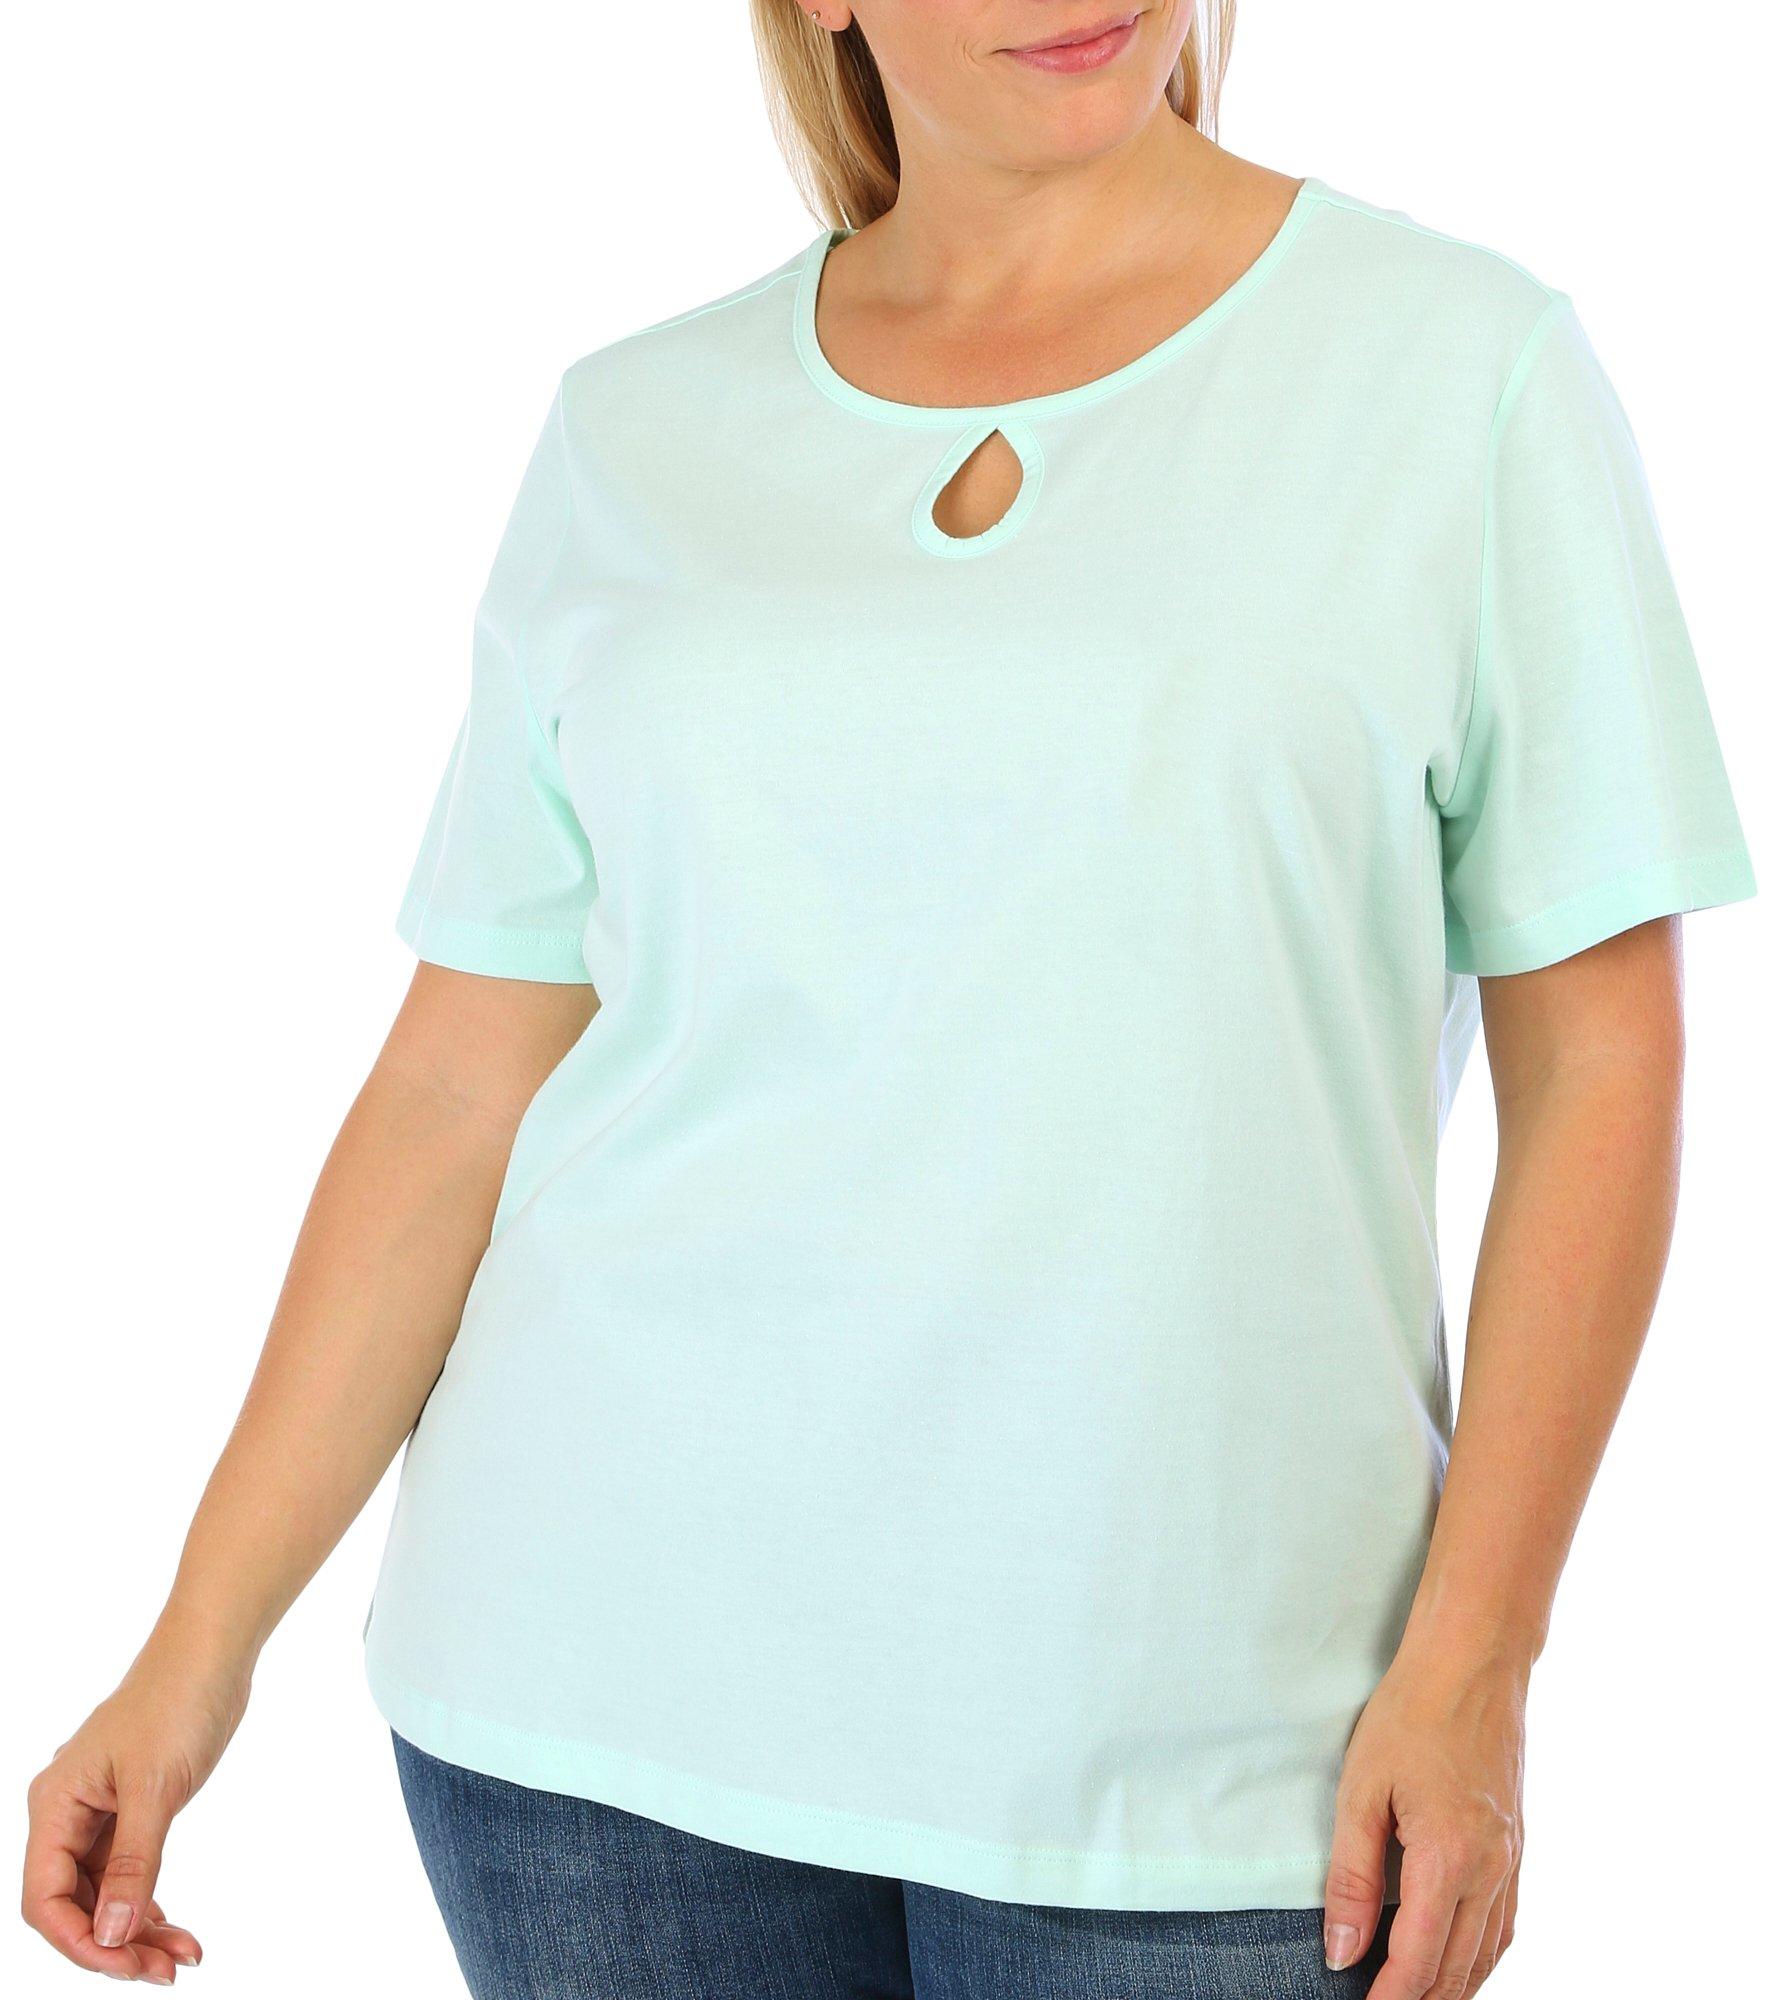 Coral Bay Plus Solid Keyhole Short Sleeve Top